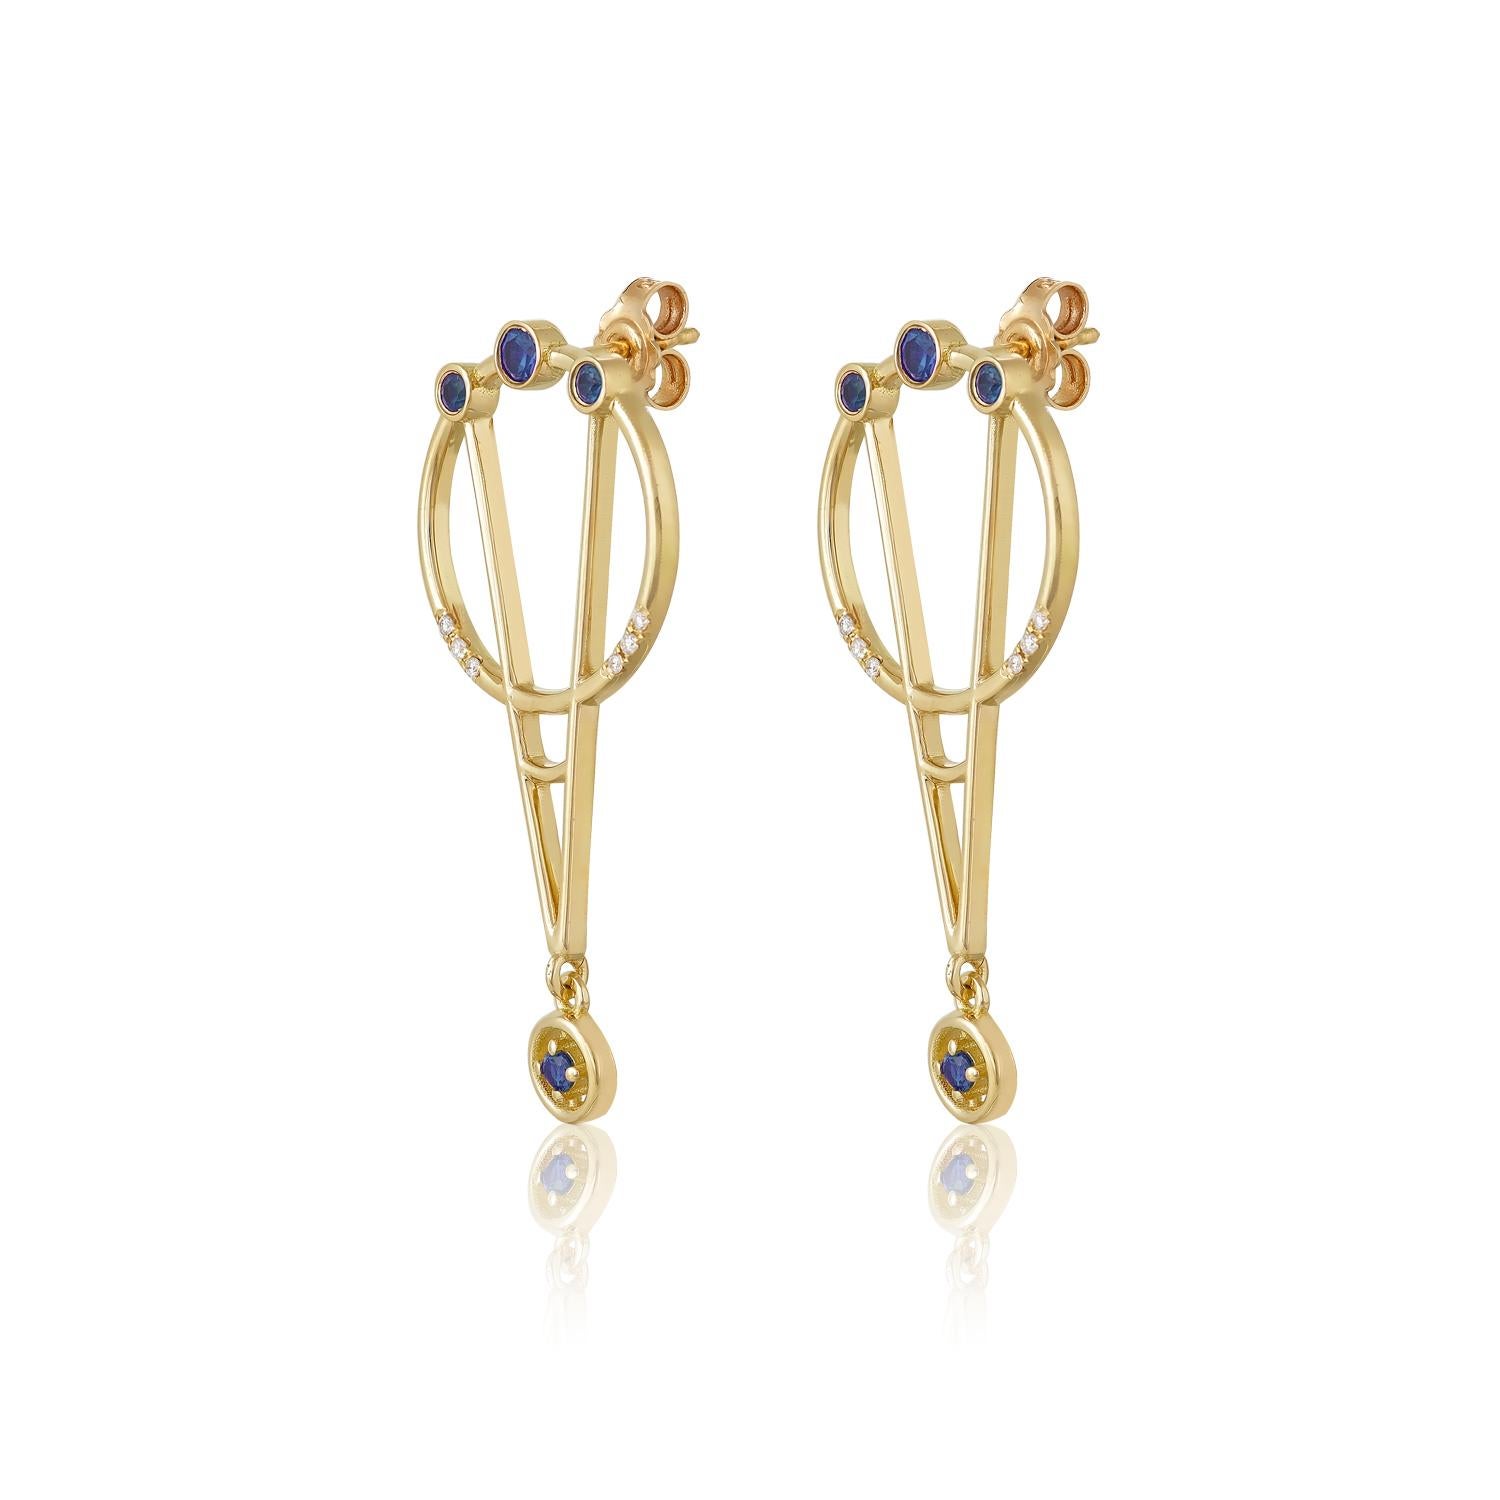 Designer: Alexia Gryllaki
Dimensions: L37x17mm
Weight: approximately 6.2g (pair)
Barcode: ING030ES

The Interlocking Geometry earrings in 18 karat yellow gold with sapphires approx. 0.48cts and round brilliant-cut diamonds approx. 0.06cts.

About